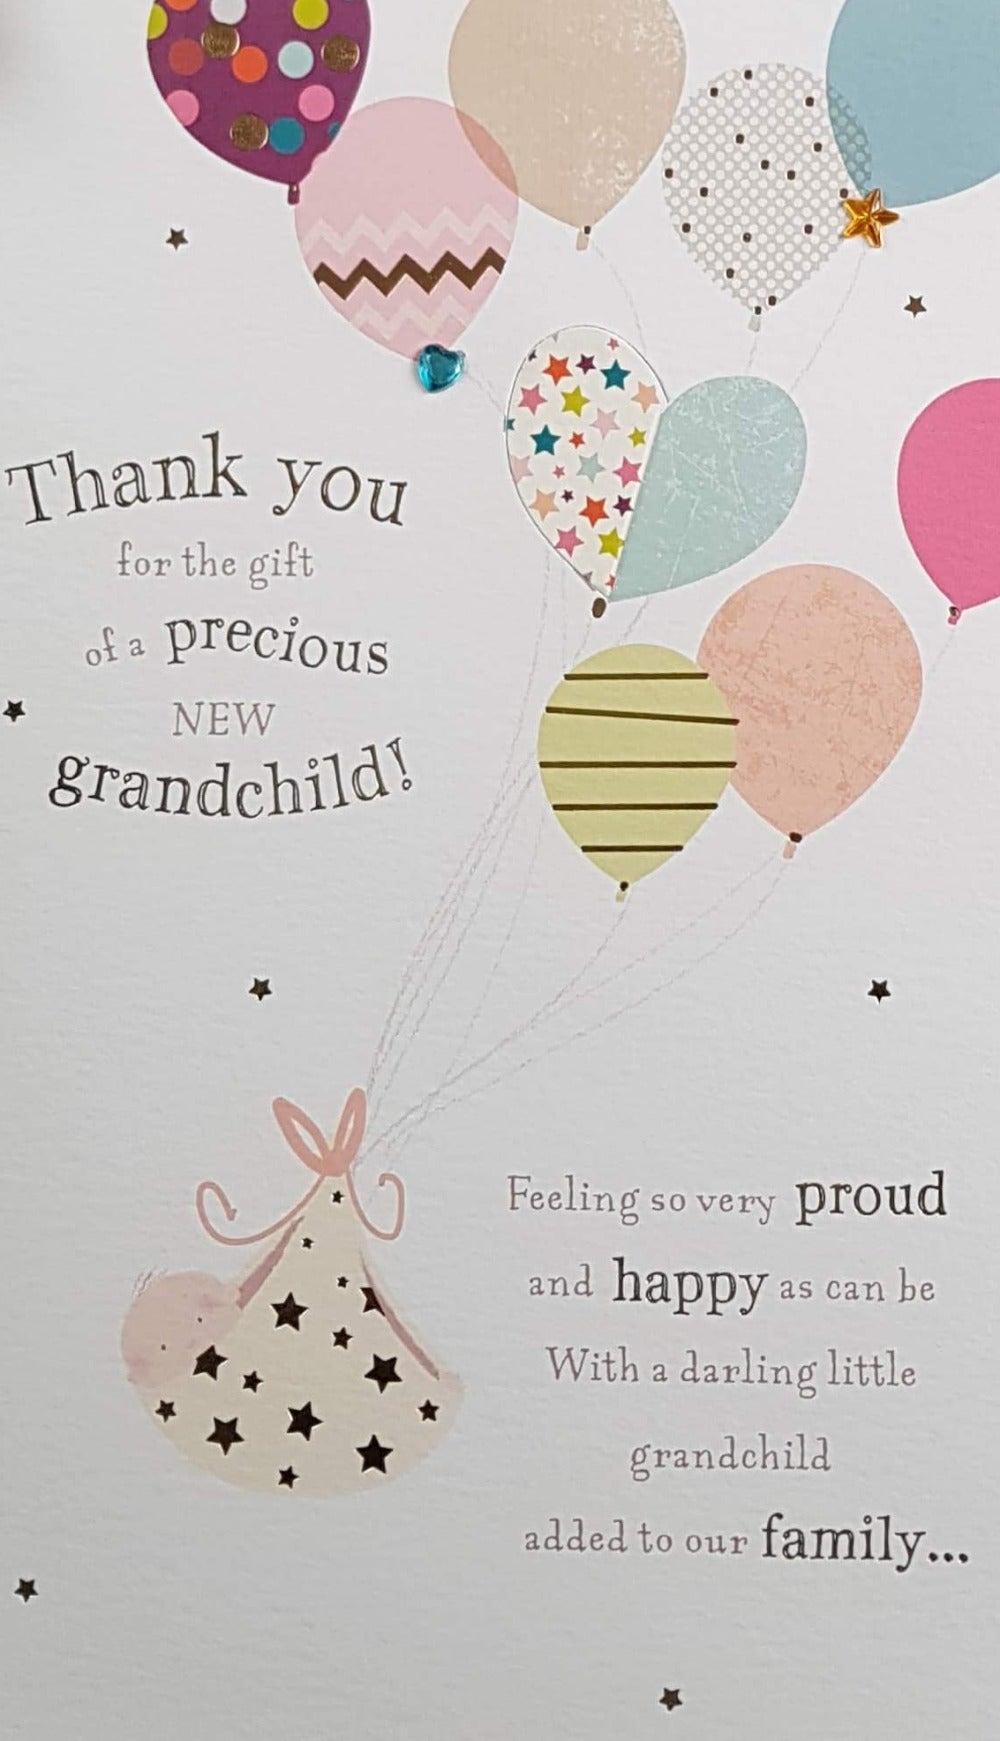 New Baby Card - Grandchild / Thank You For The Gift Of A Precious Grandchild